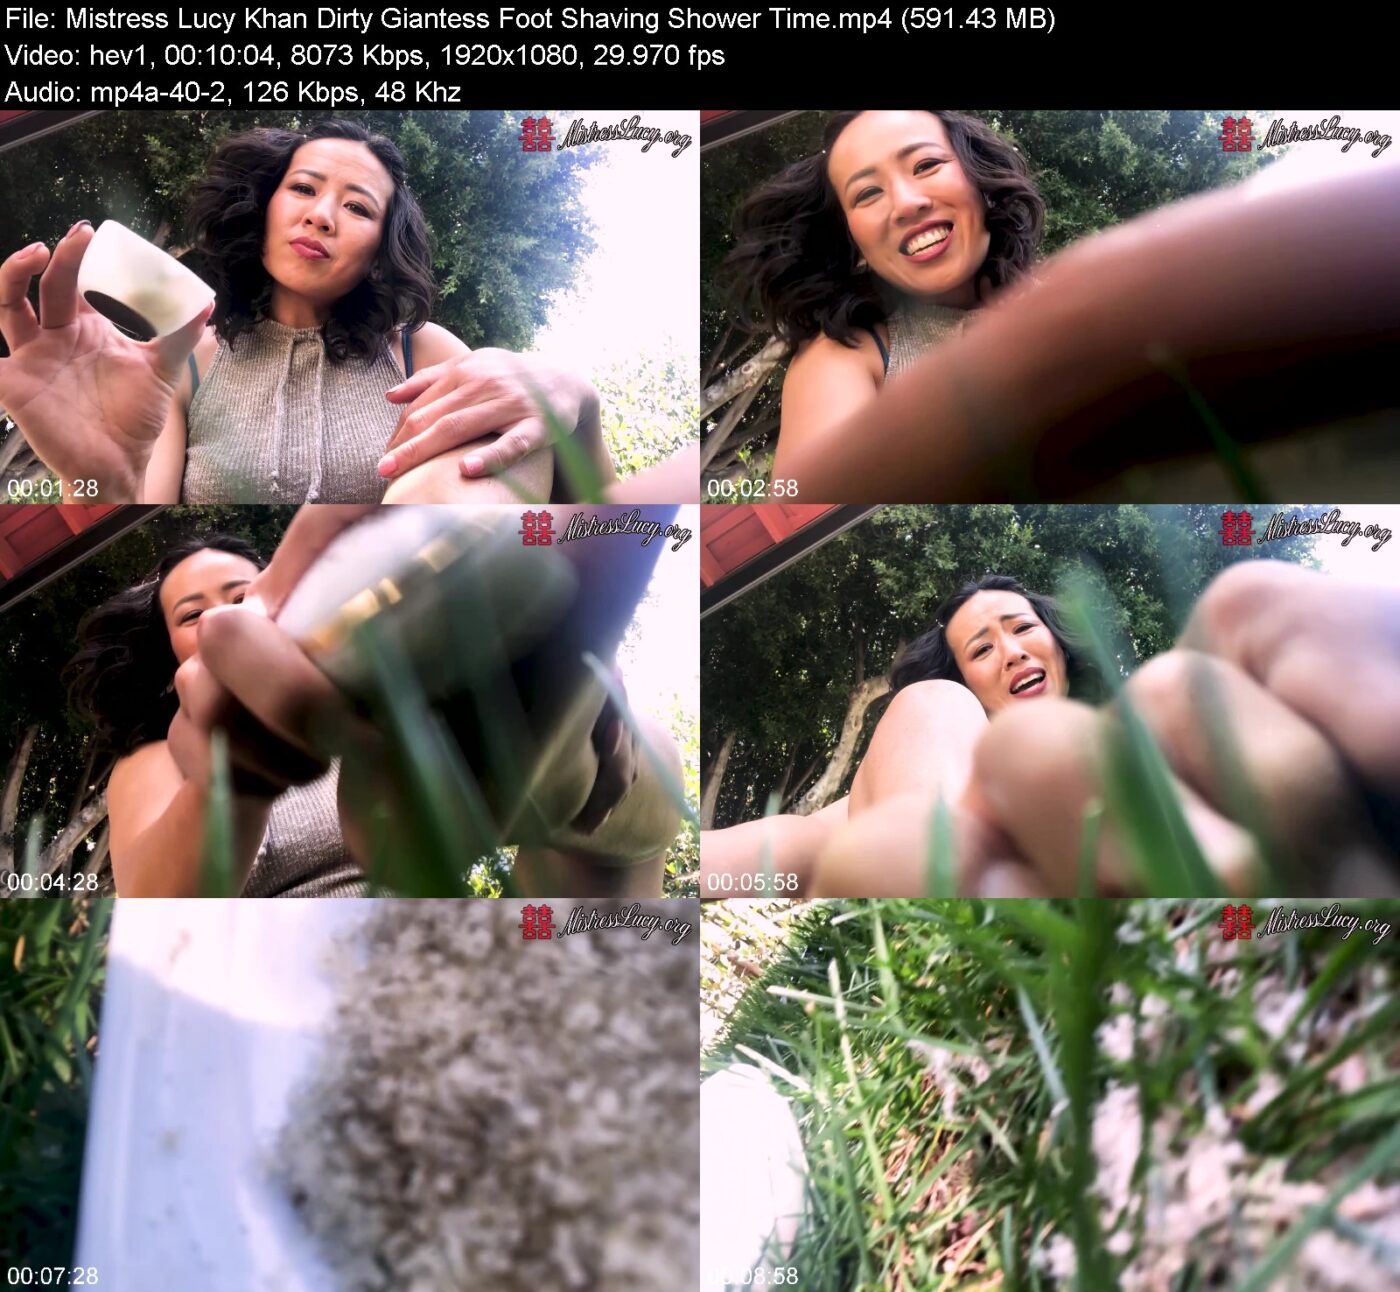 Mistress Lucy Khan in Dirty Giantess Foot Shaving Shower Time